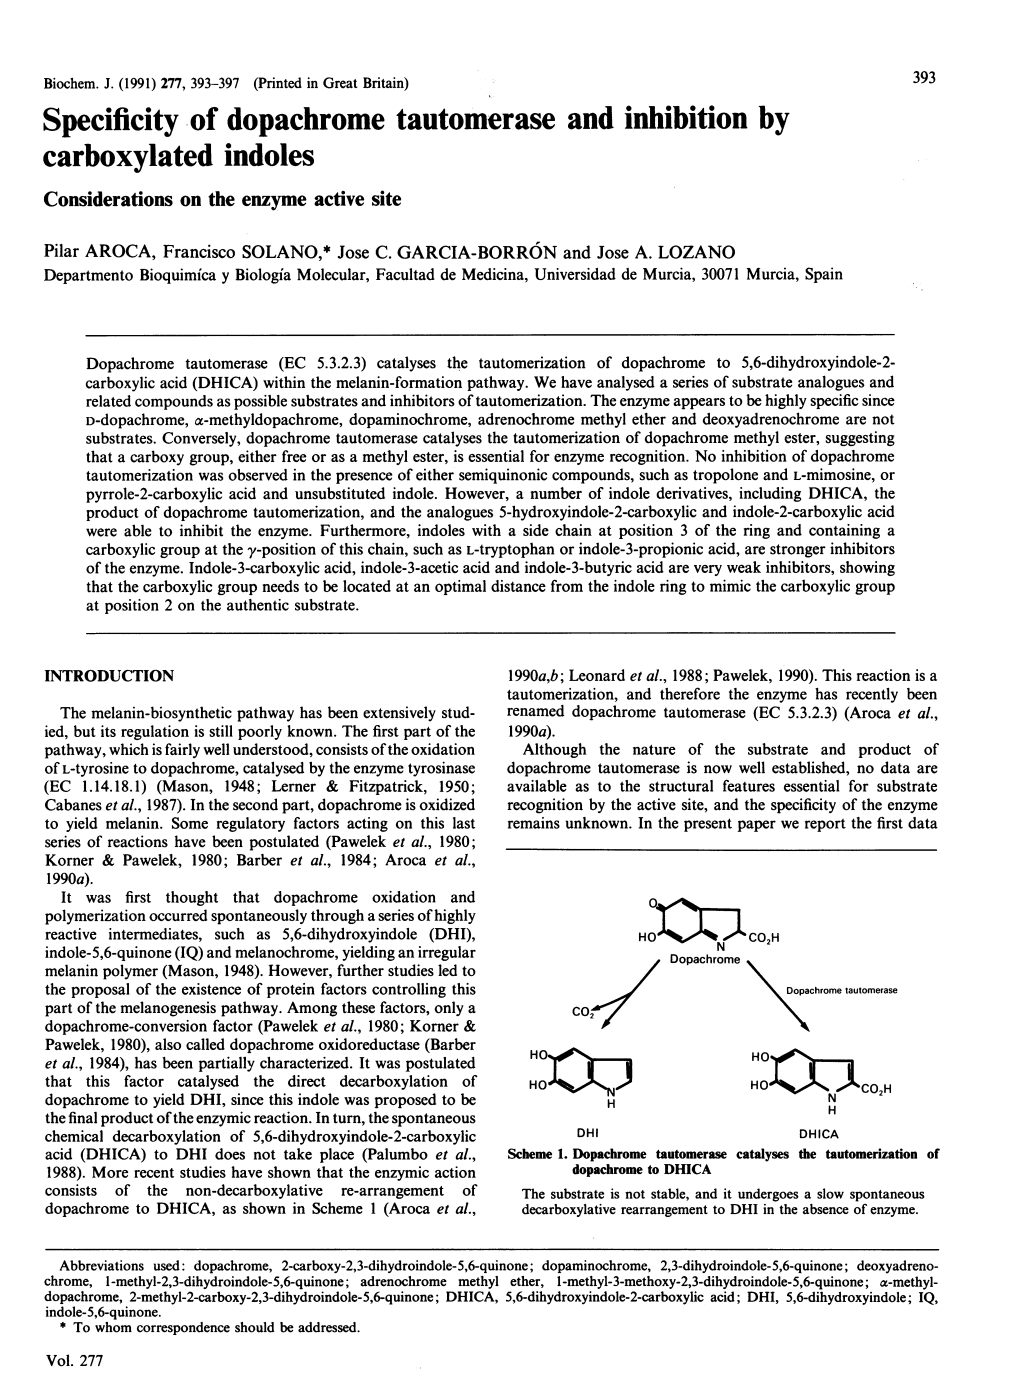 Specificity of Dopachrome Tautomerase and Inhibition by Carboxylated Indoles Considerations on the Enzyme Active Site